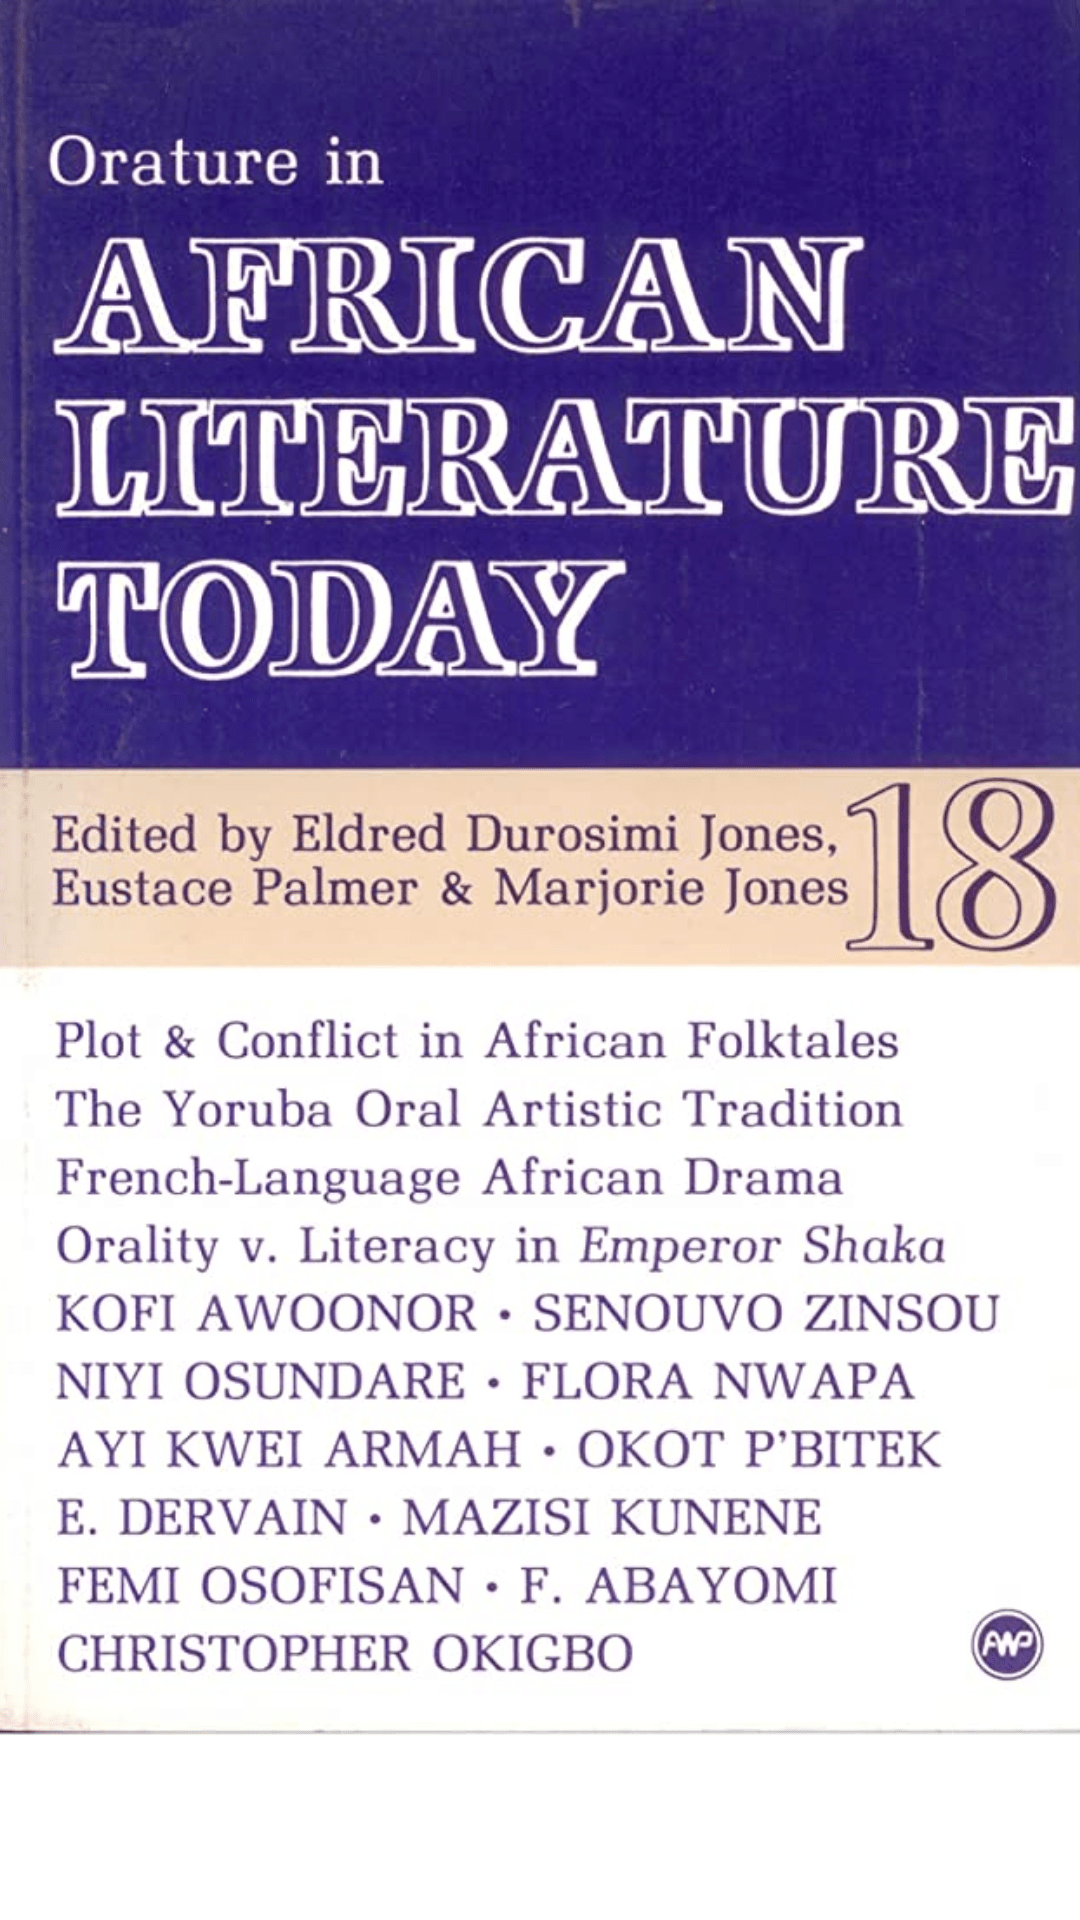 Orature in African Literature Today: A Review: 18